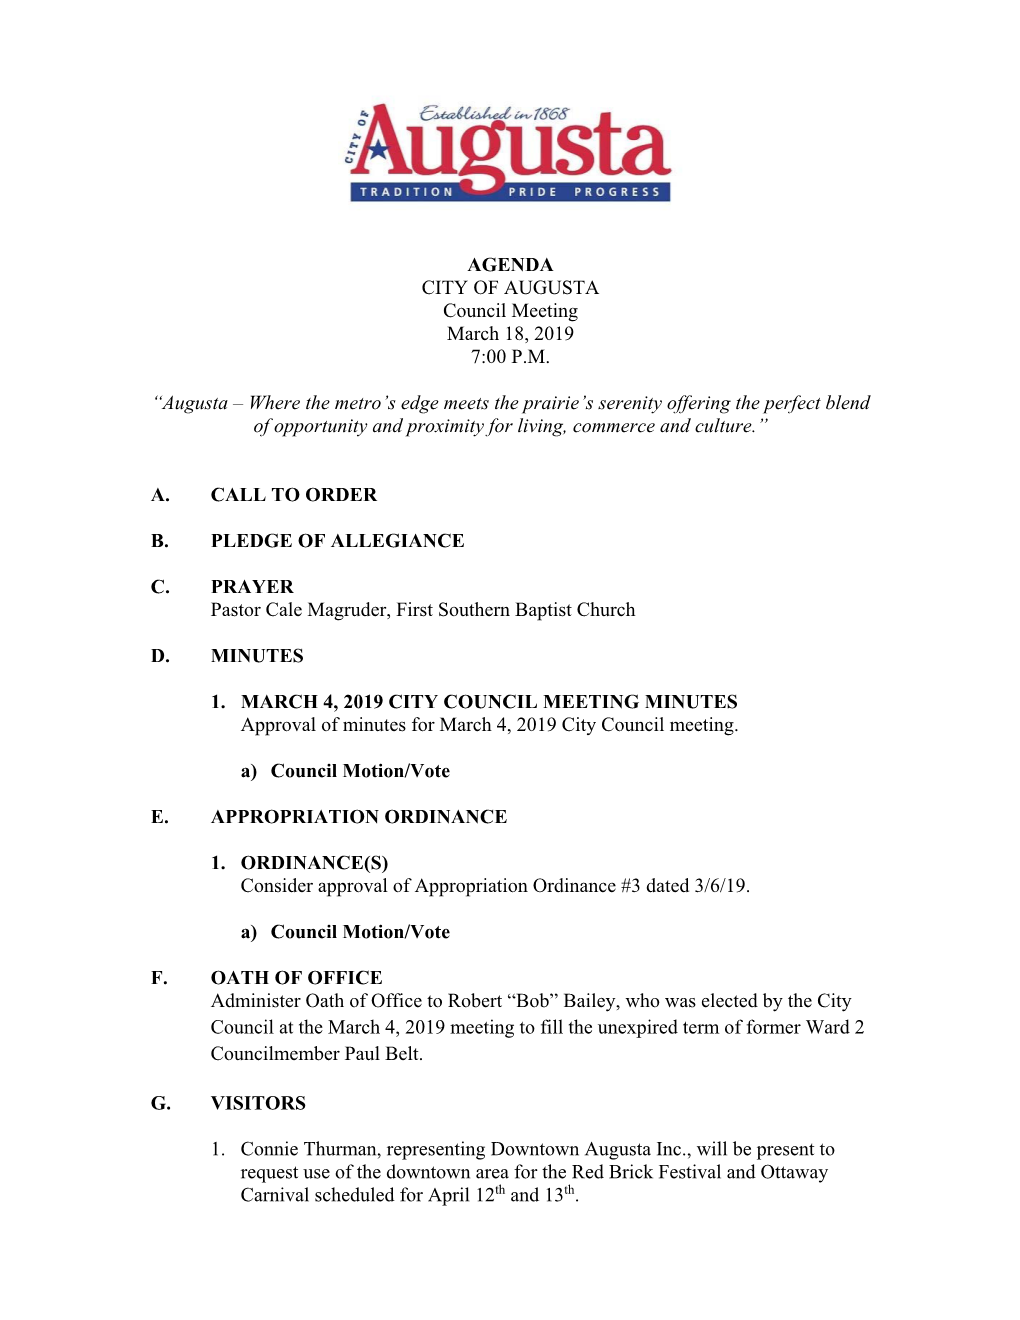 AGENDA CITY of AUGUSTA Council Meeting March 18, 2019 7:00 P.M